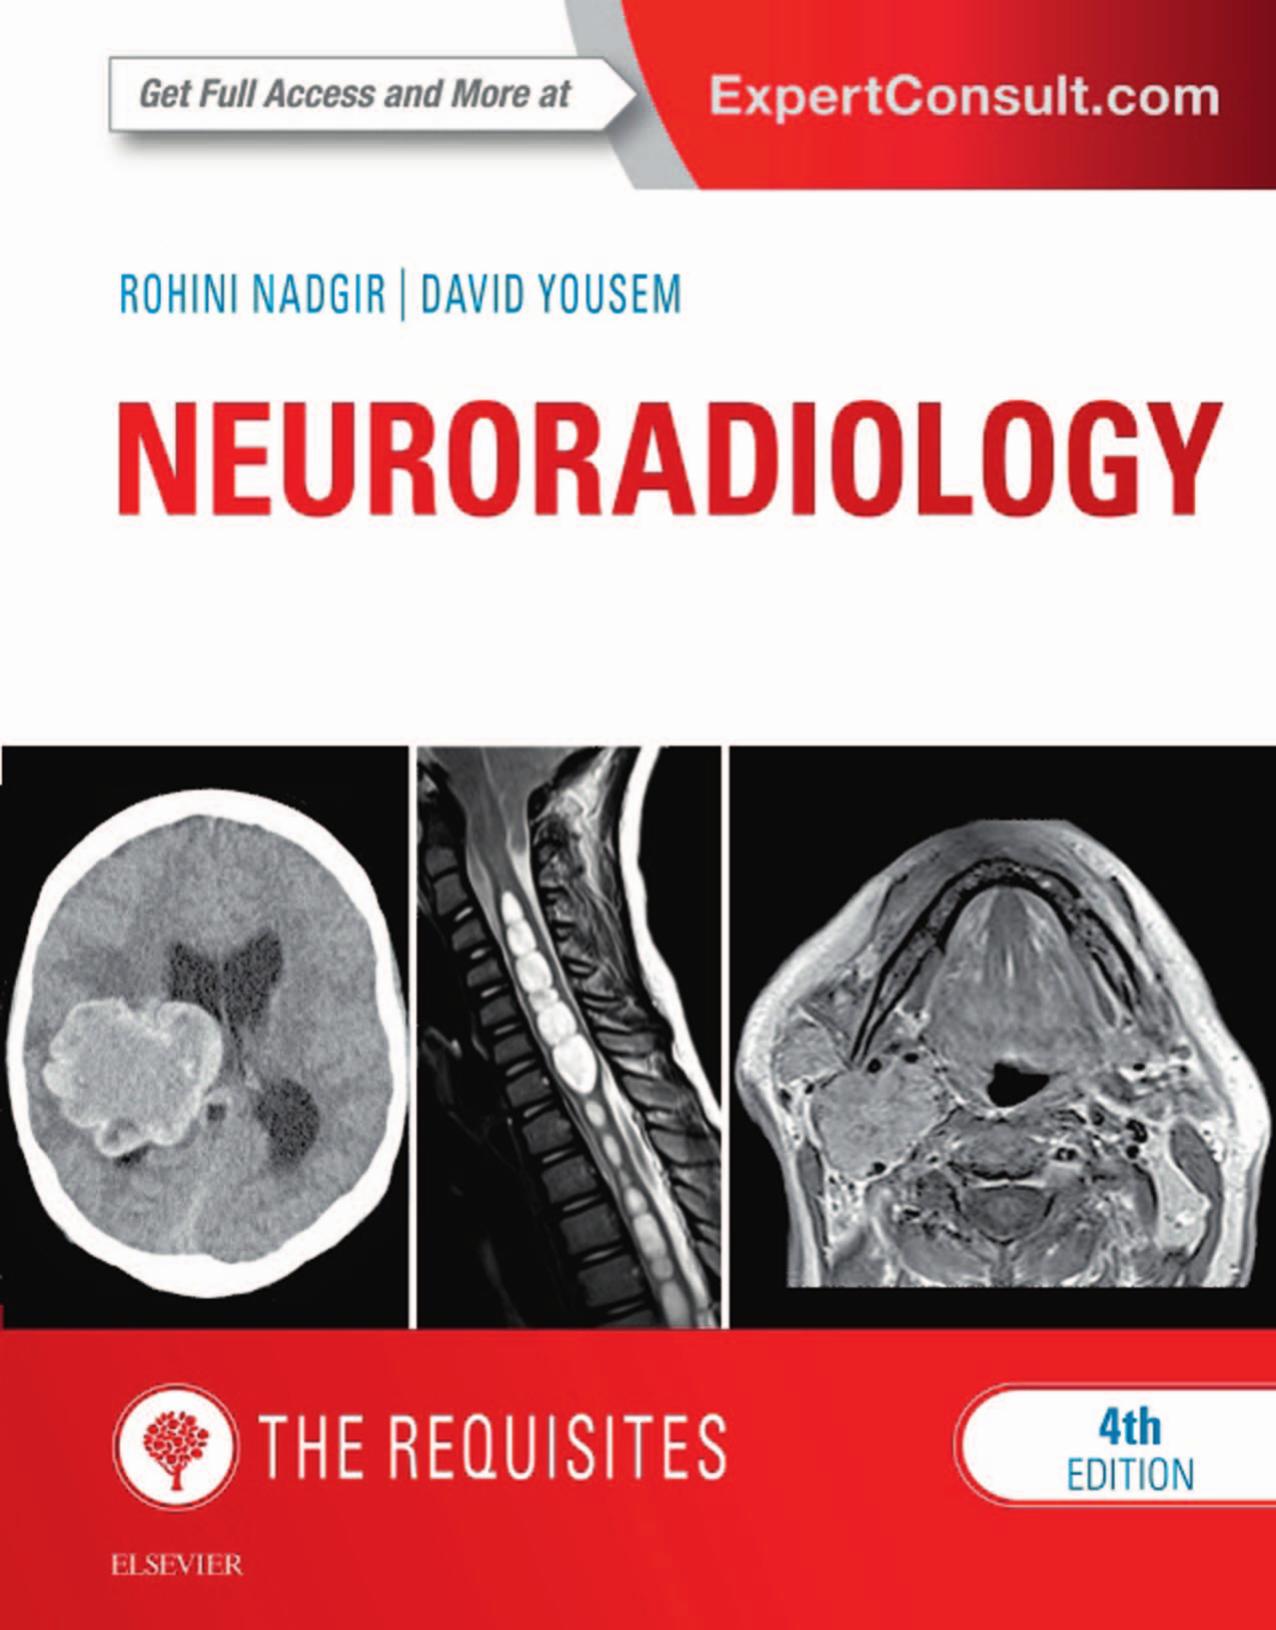 Neuroradiology  The Requisites ( PDFDrive.com )